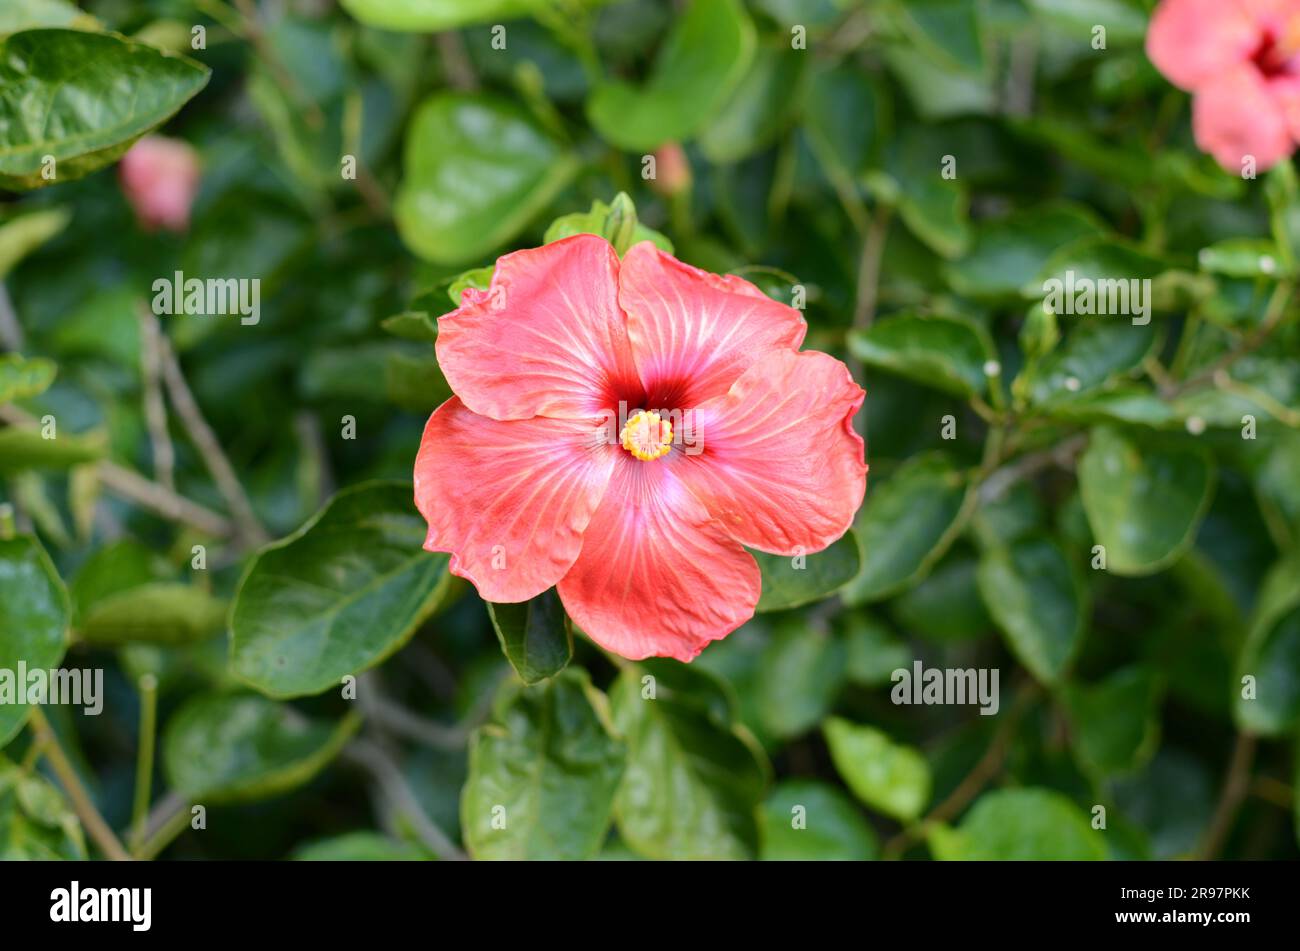 Red Hibiscus Flower In The Auckland Botanic Gardens. Stock Photo